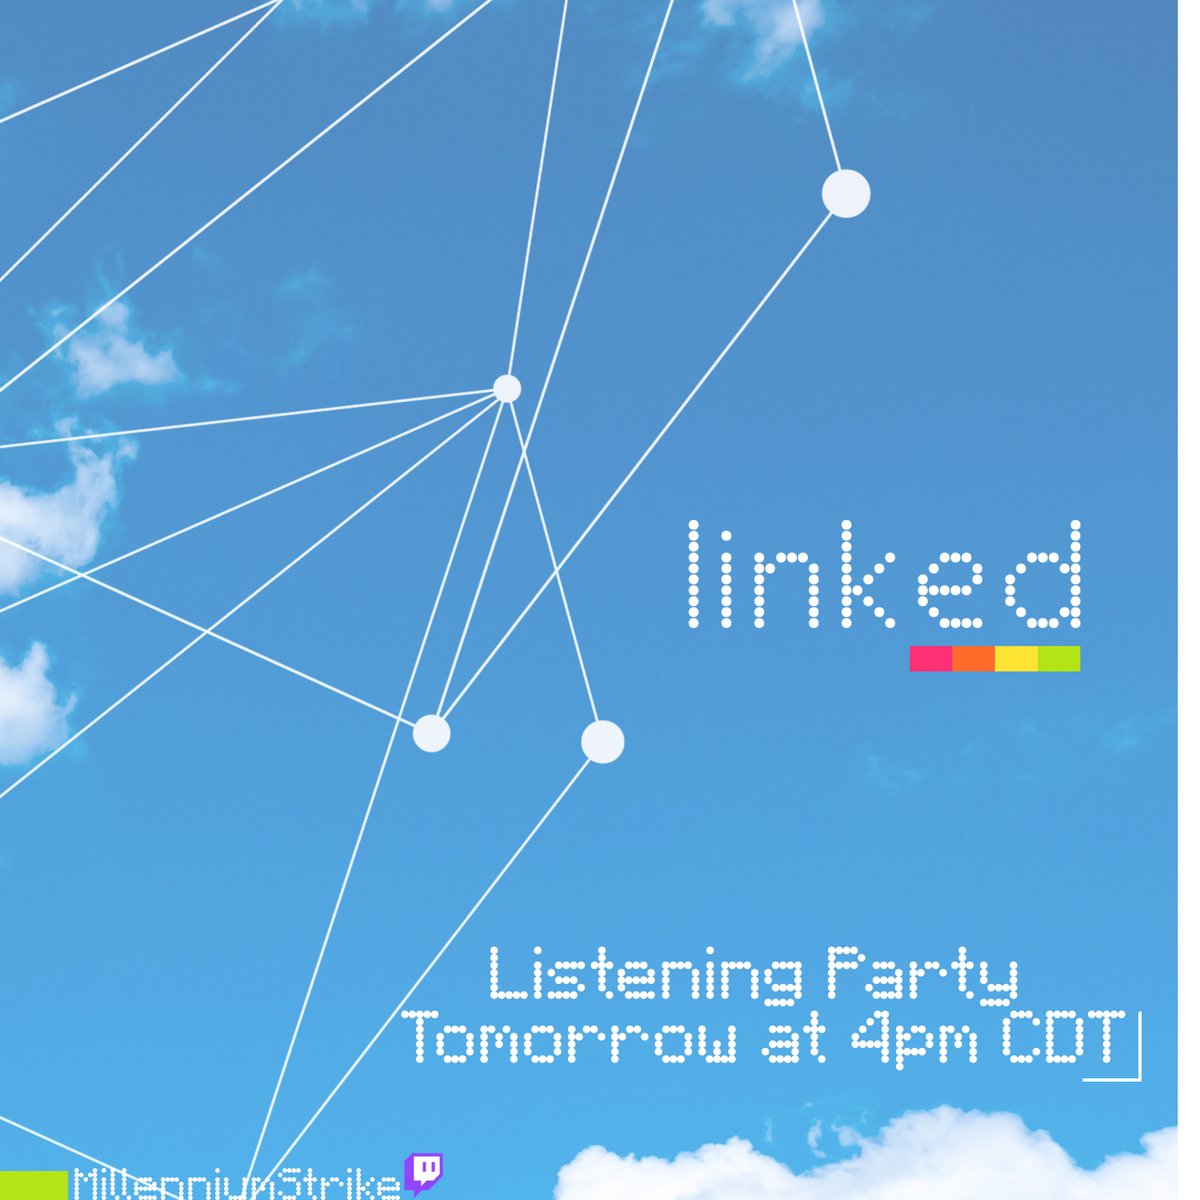 TOMORROW at 4:00pm CDT MILLENNIUM STRIKE: LINKED EP - LISTENING PARTY!! featuring new music by: @iglitchyan @VioletAngelVT saiiko2 @XytherPrime @crystalflowerm @v8cola1 @lilithpads @mailtomusic @mmicnoise @tenshi_exe @wavclipper